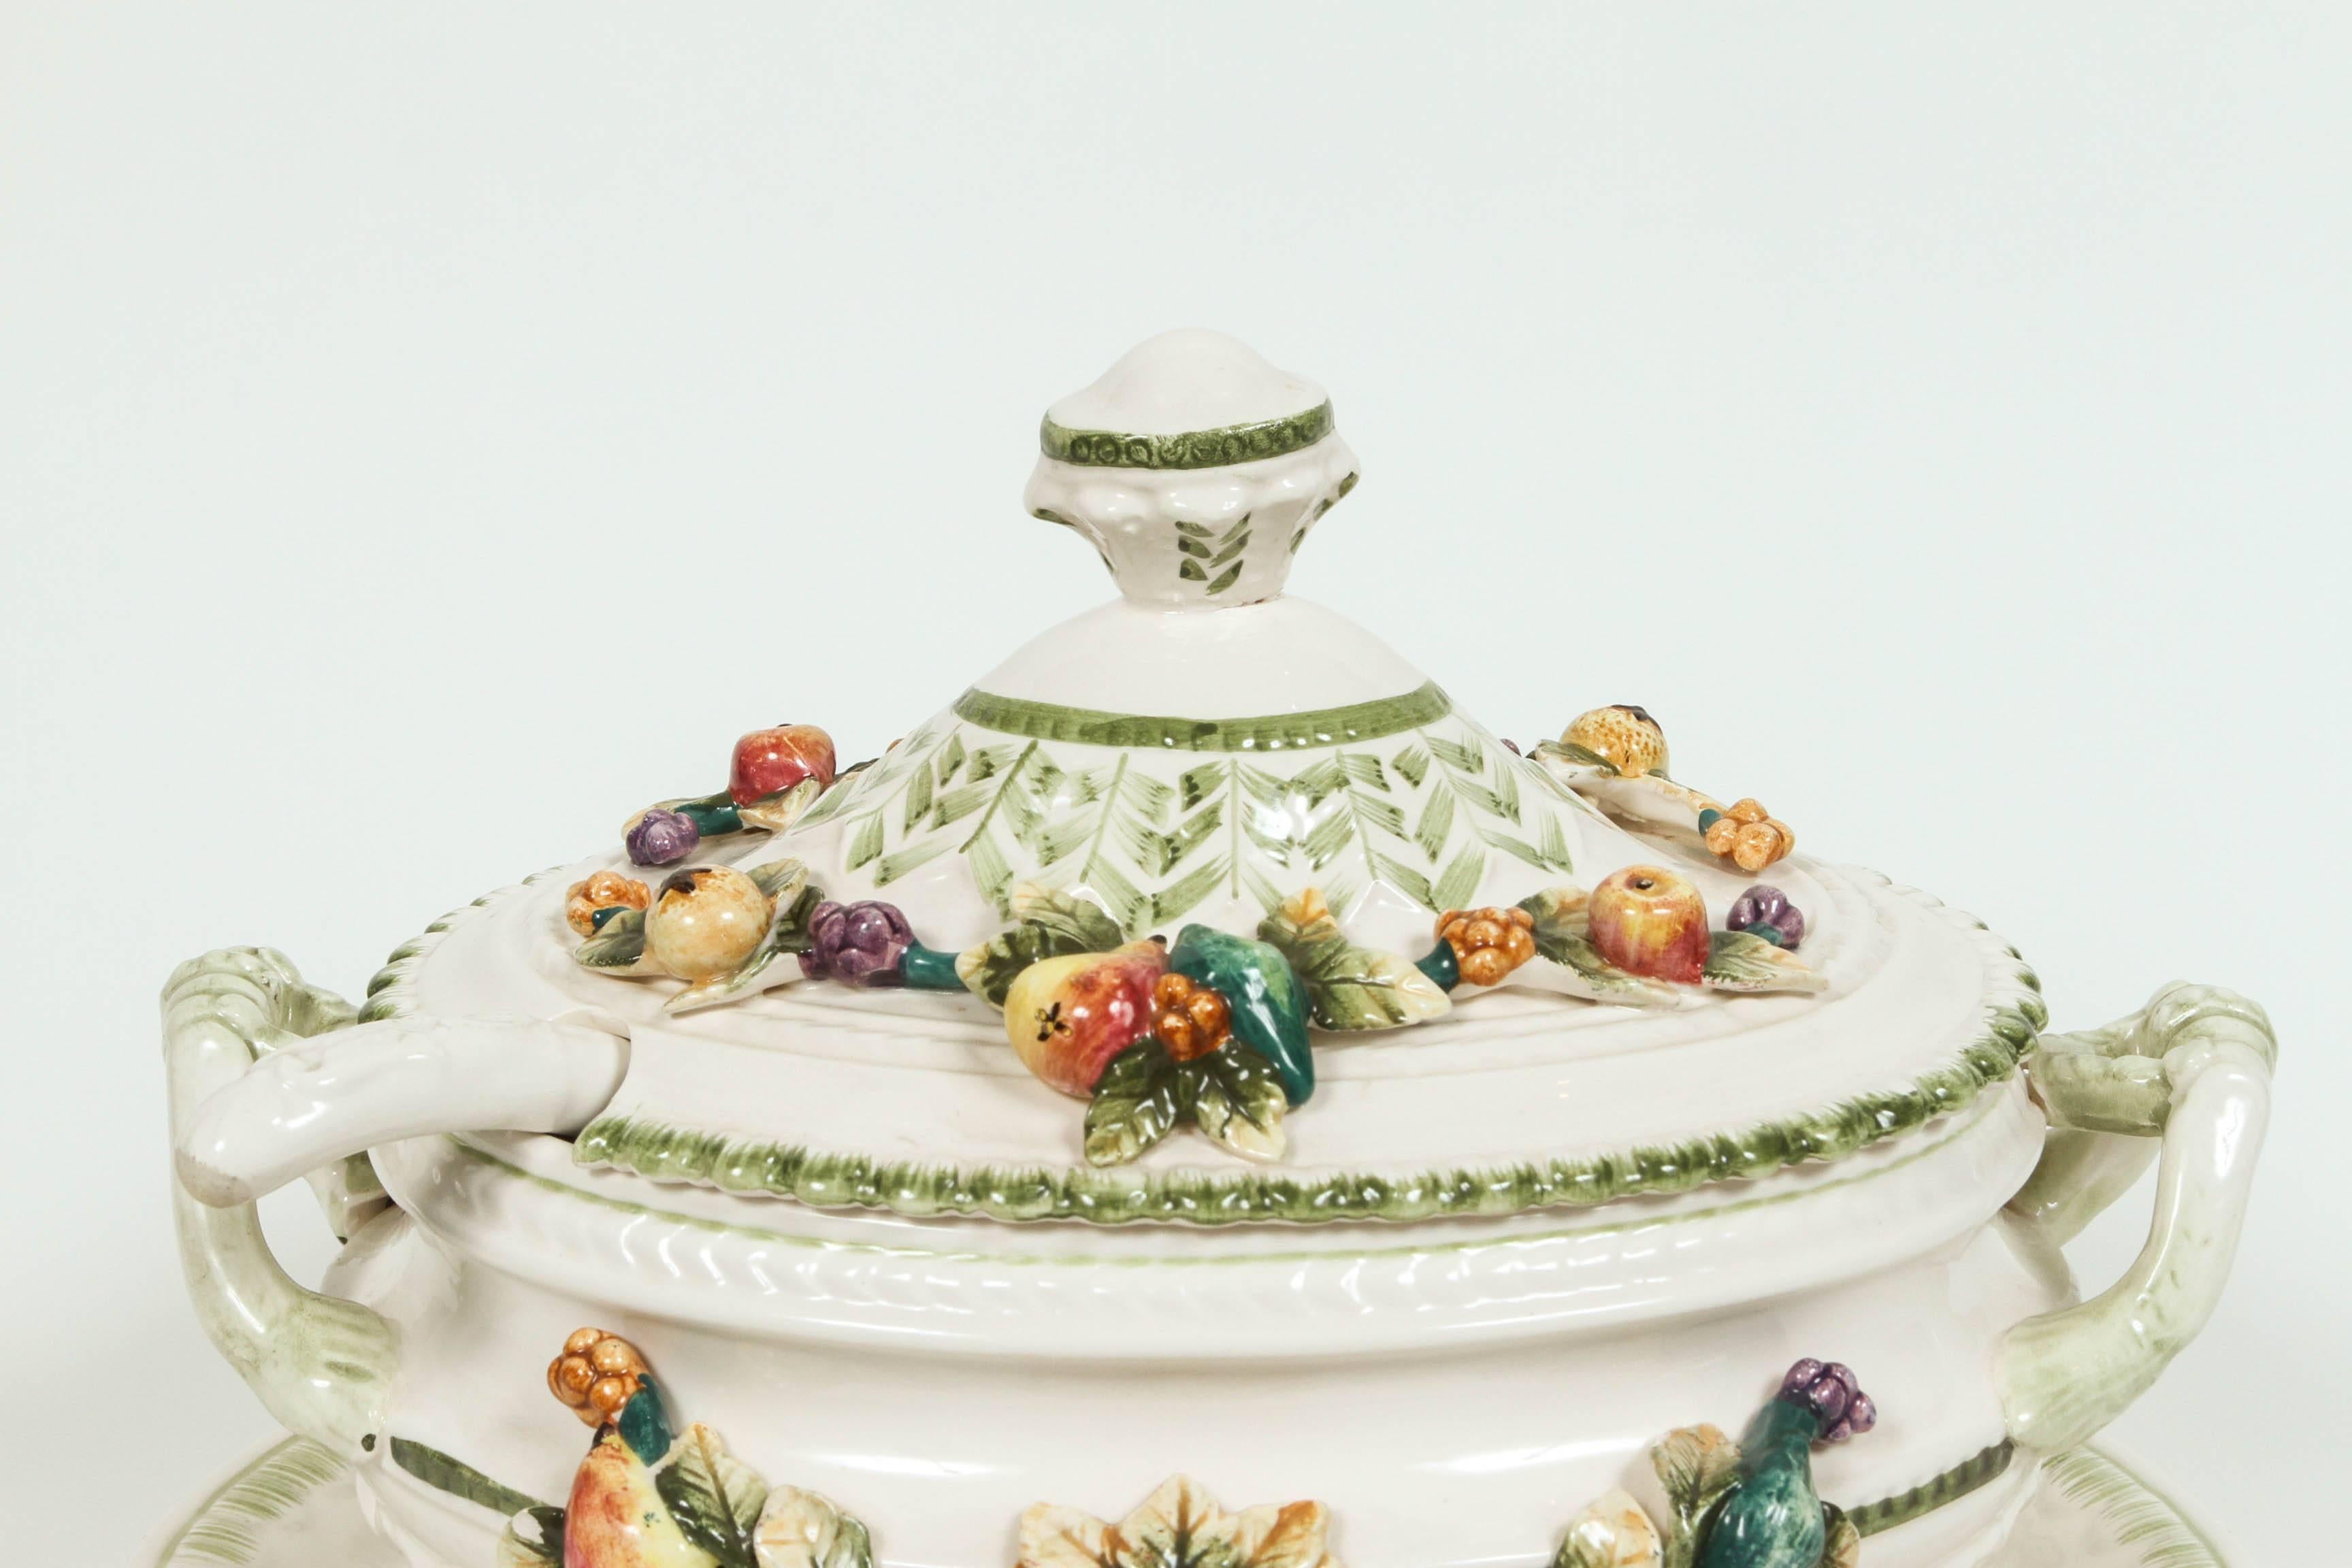 Painted Italian tureen with ladle and tray and fruit details.

Plate: W 14